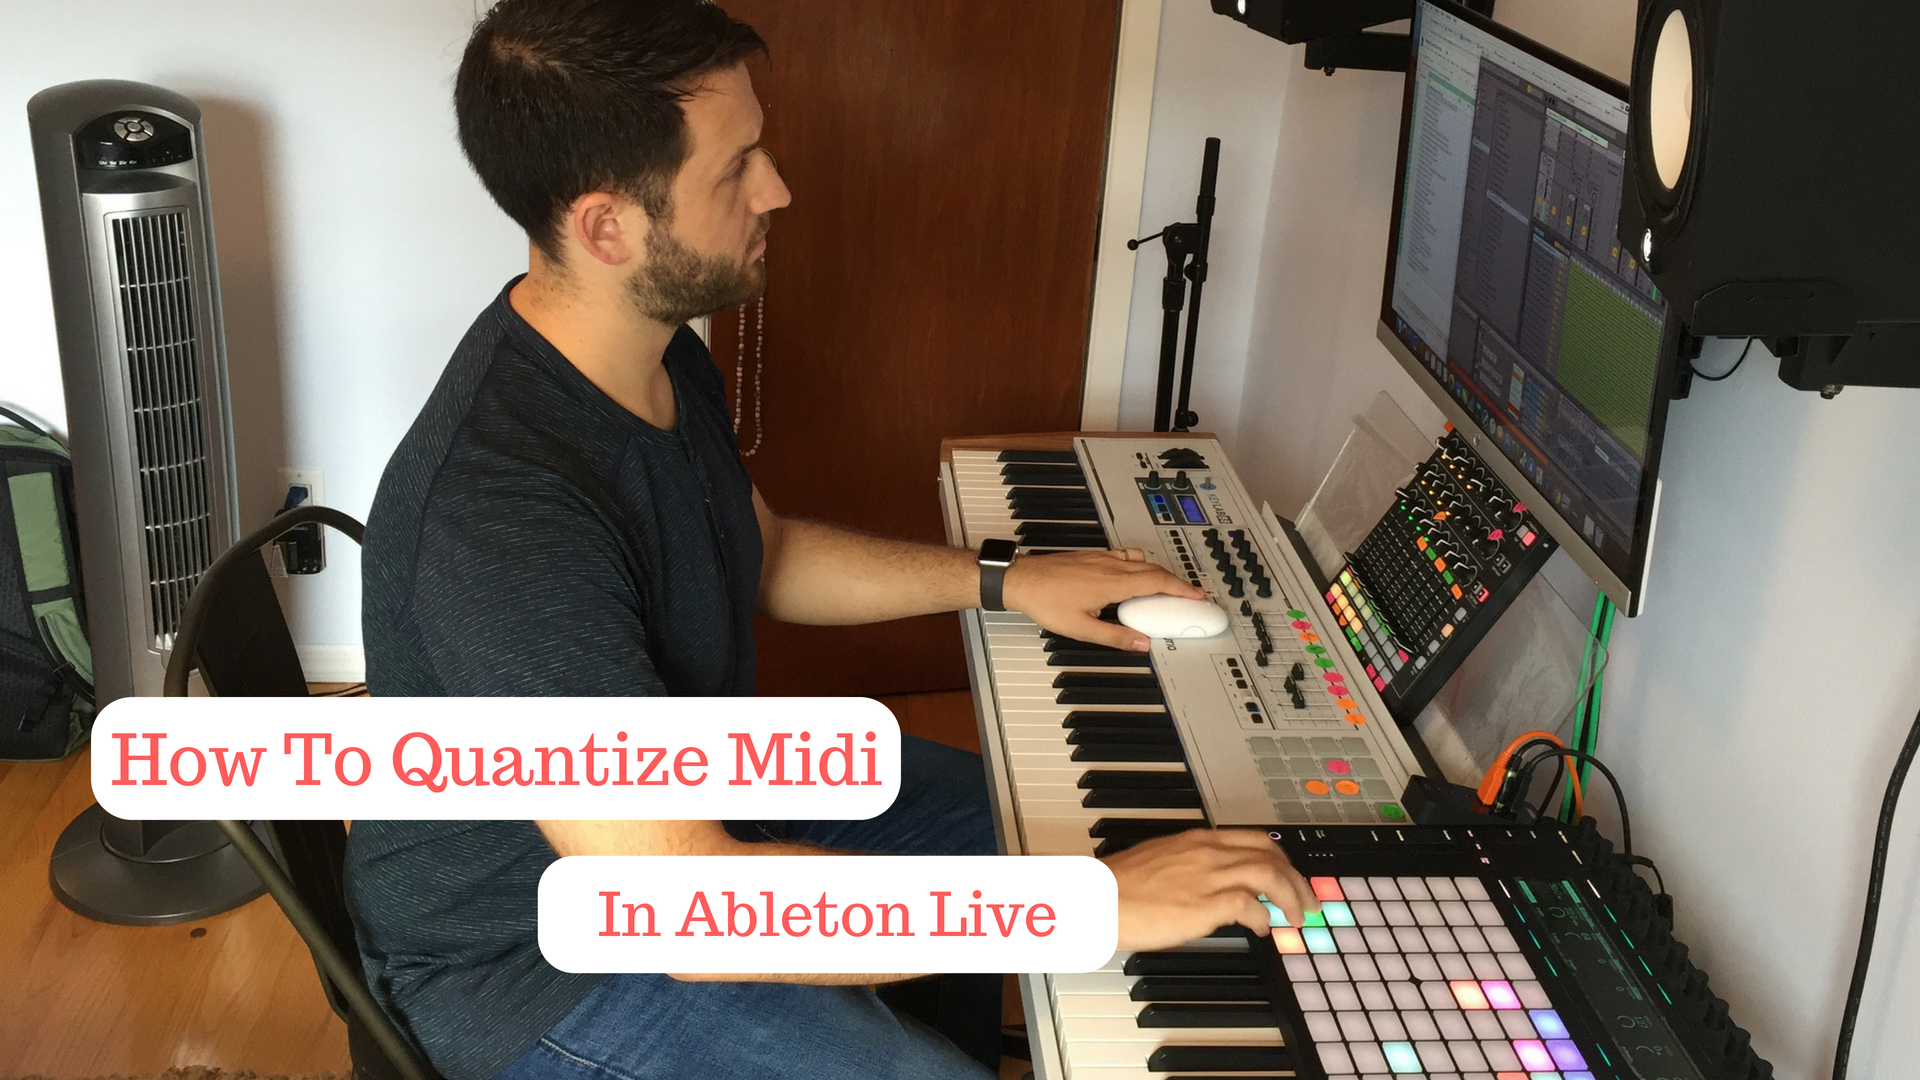 How to Quantize Midi In Ableton